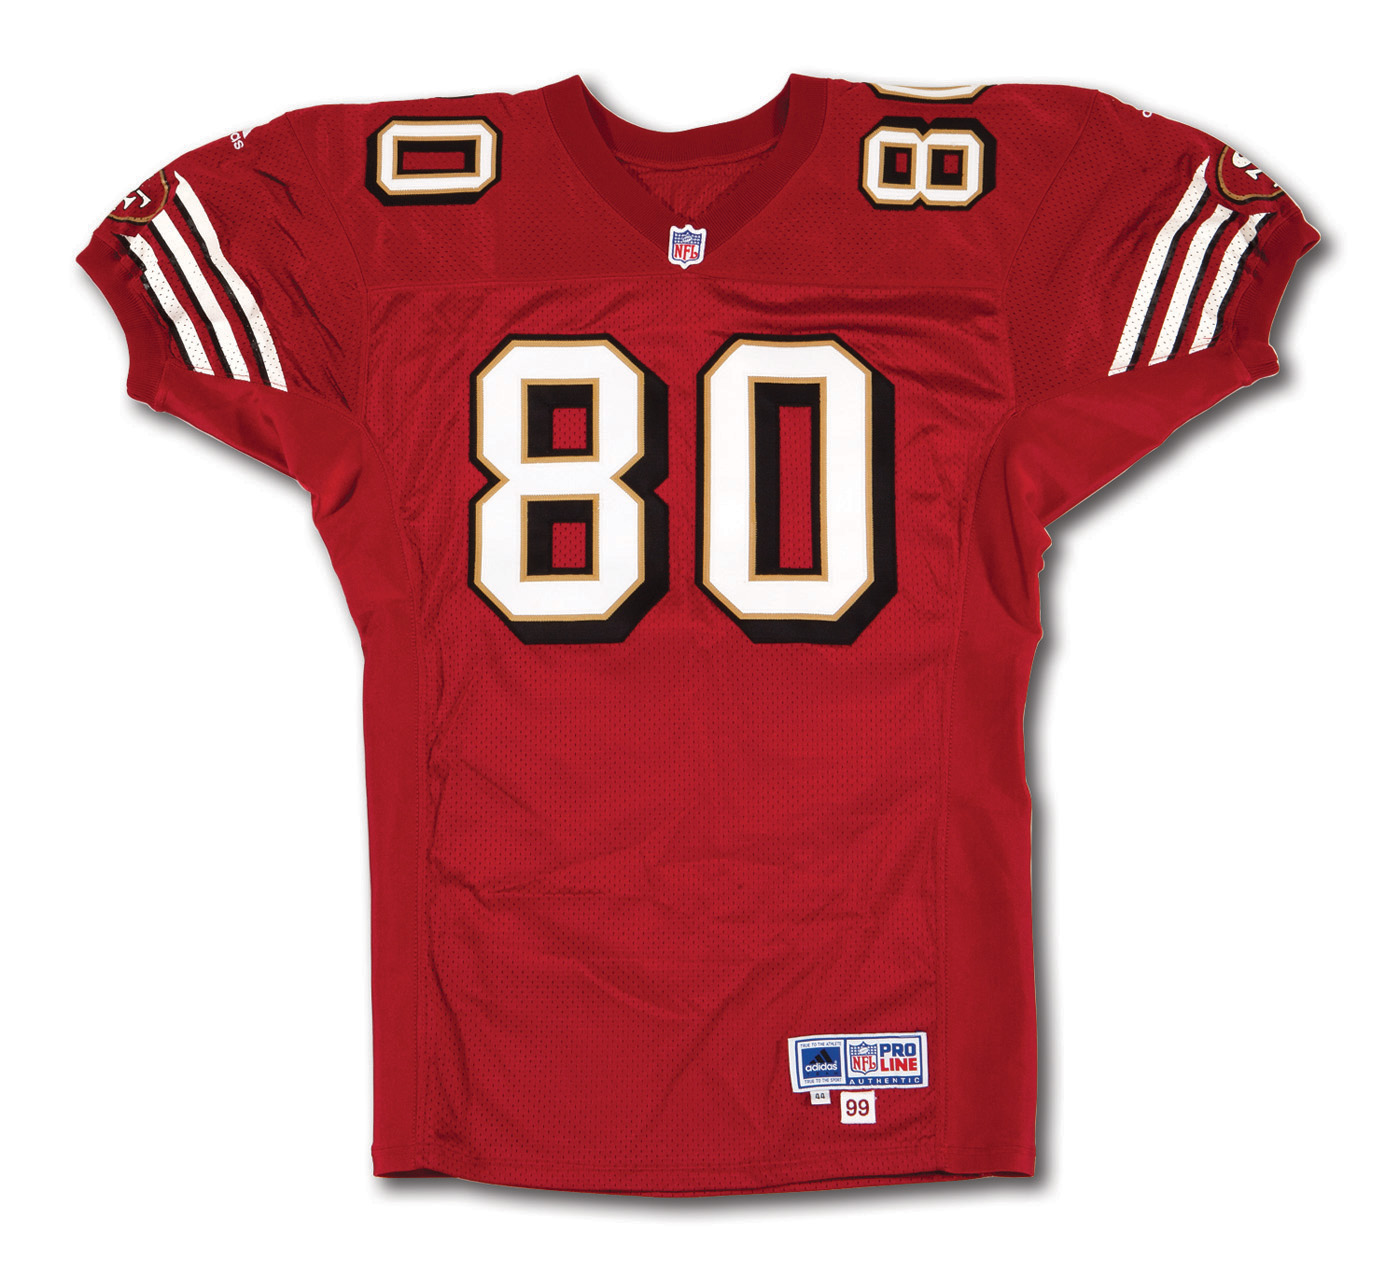 Jerry Rice Team issued San Francisco 49ers Jersey Game Used Worn